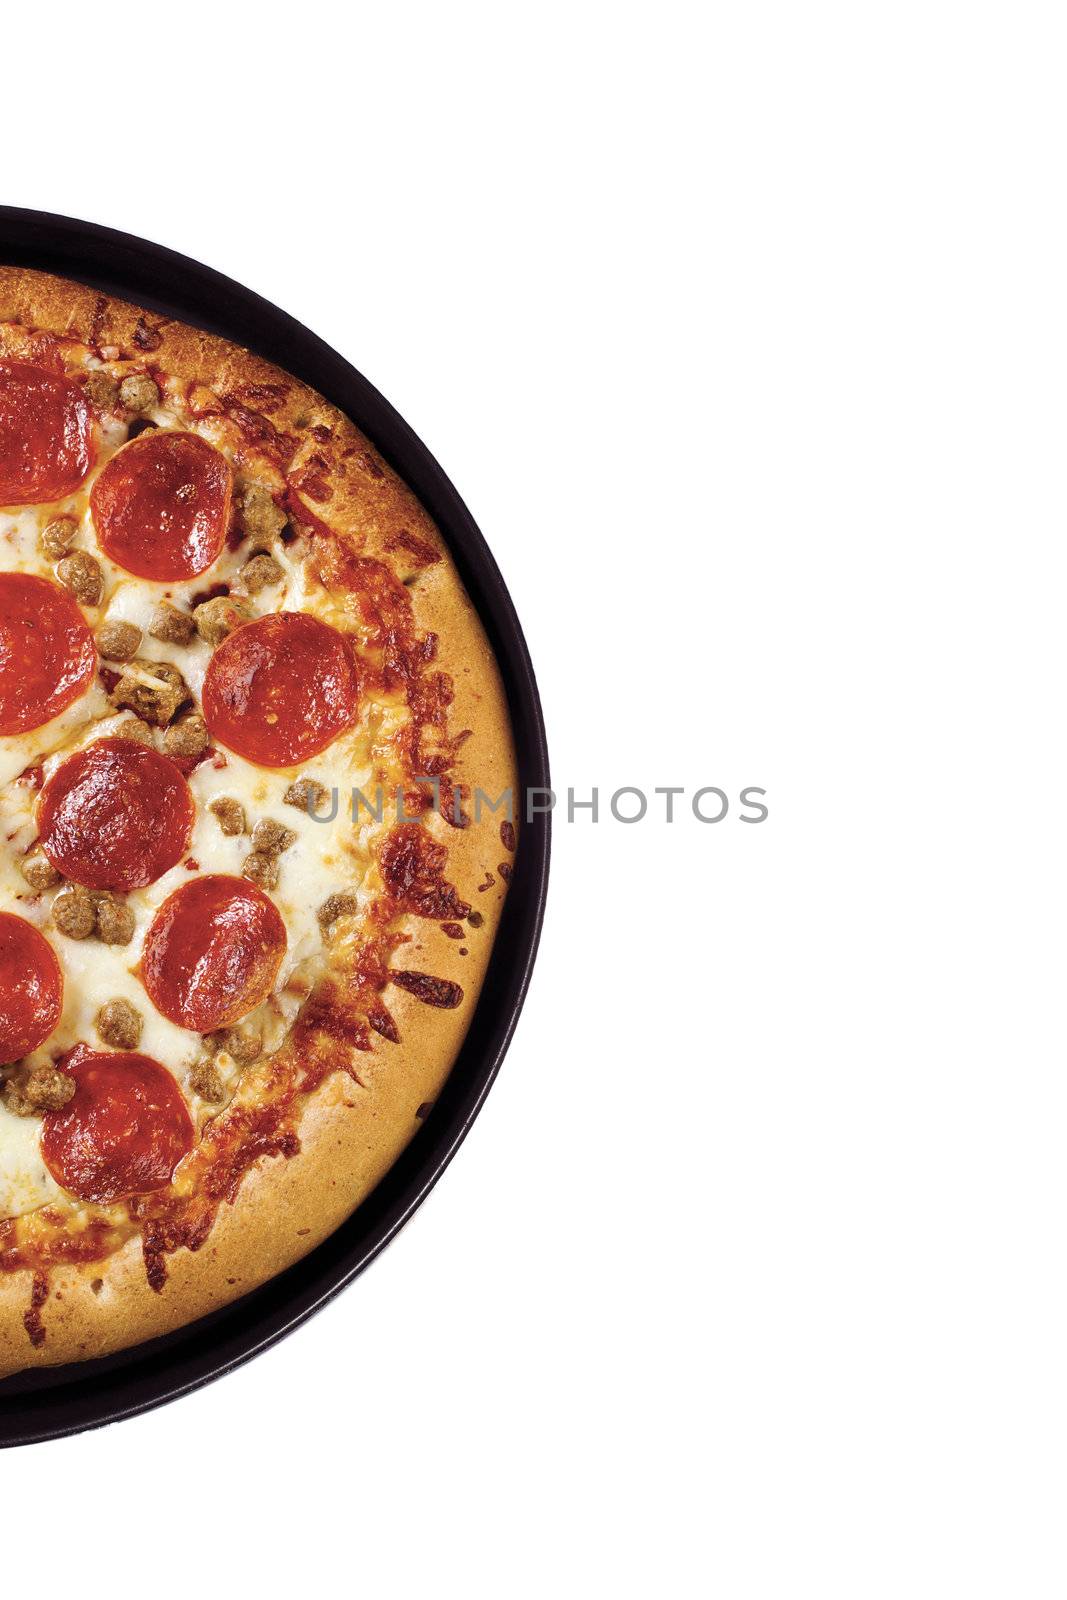 Cropped shot of a delicious pepperoni pizza isolated against white background.